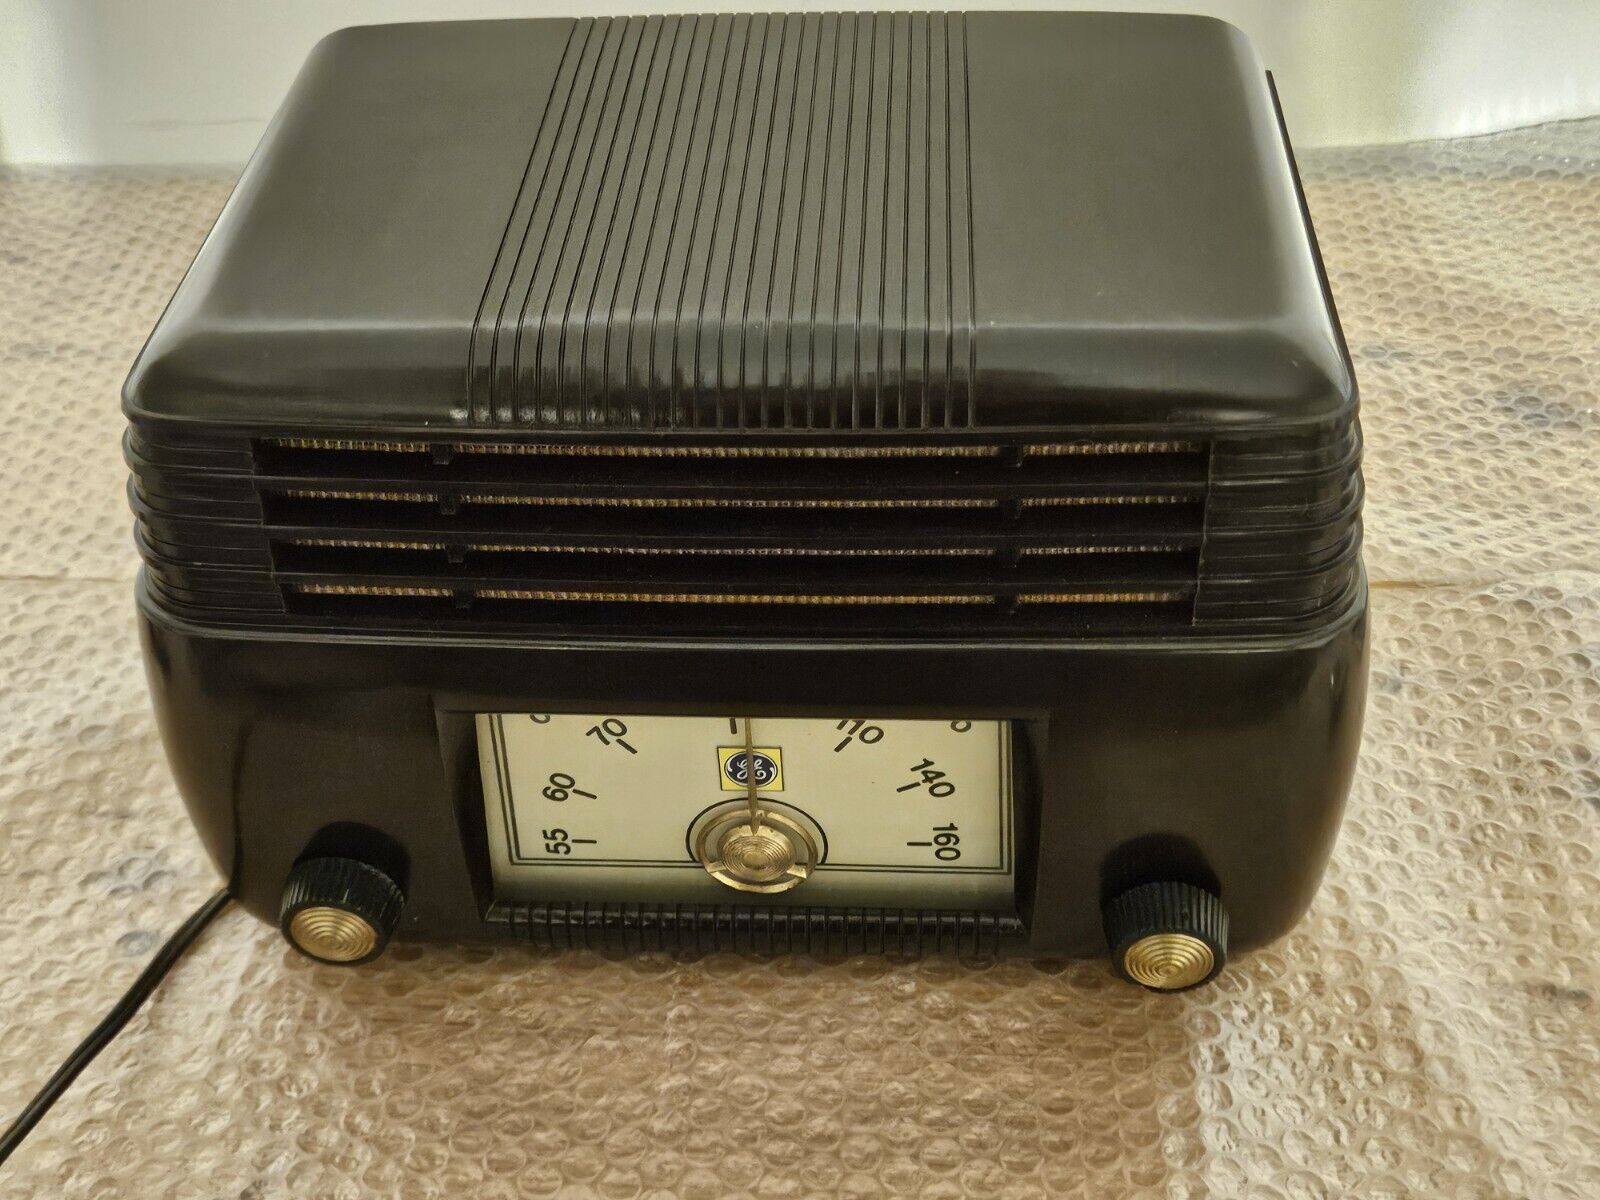 Vintage G-E General Electric Radio Model 200 Working Excellent Condition DEAL